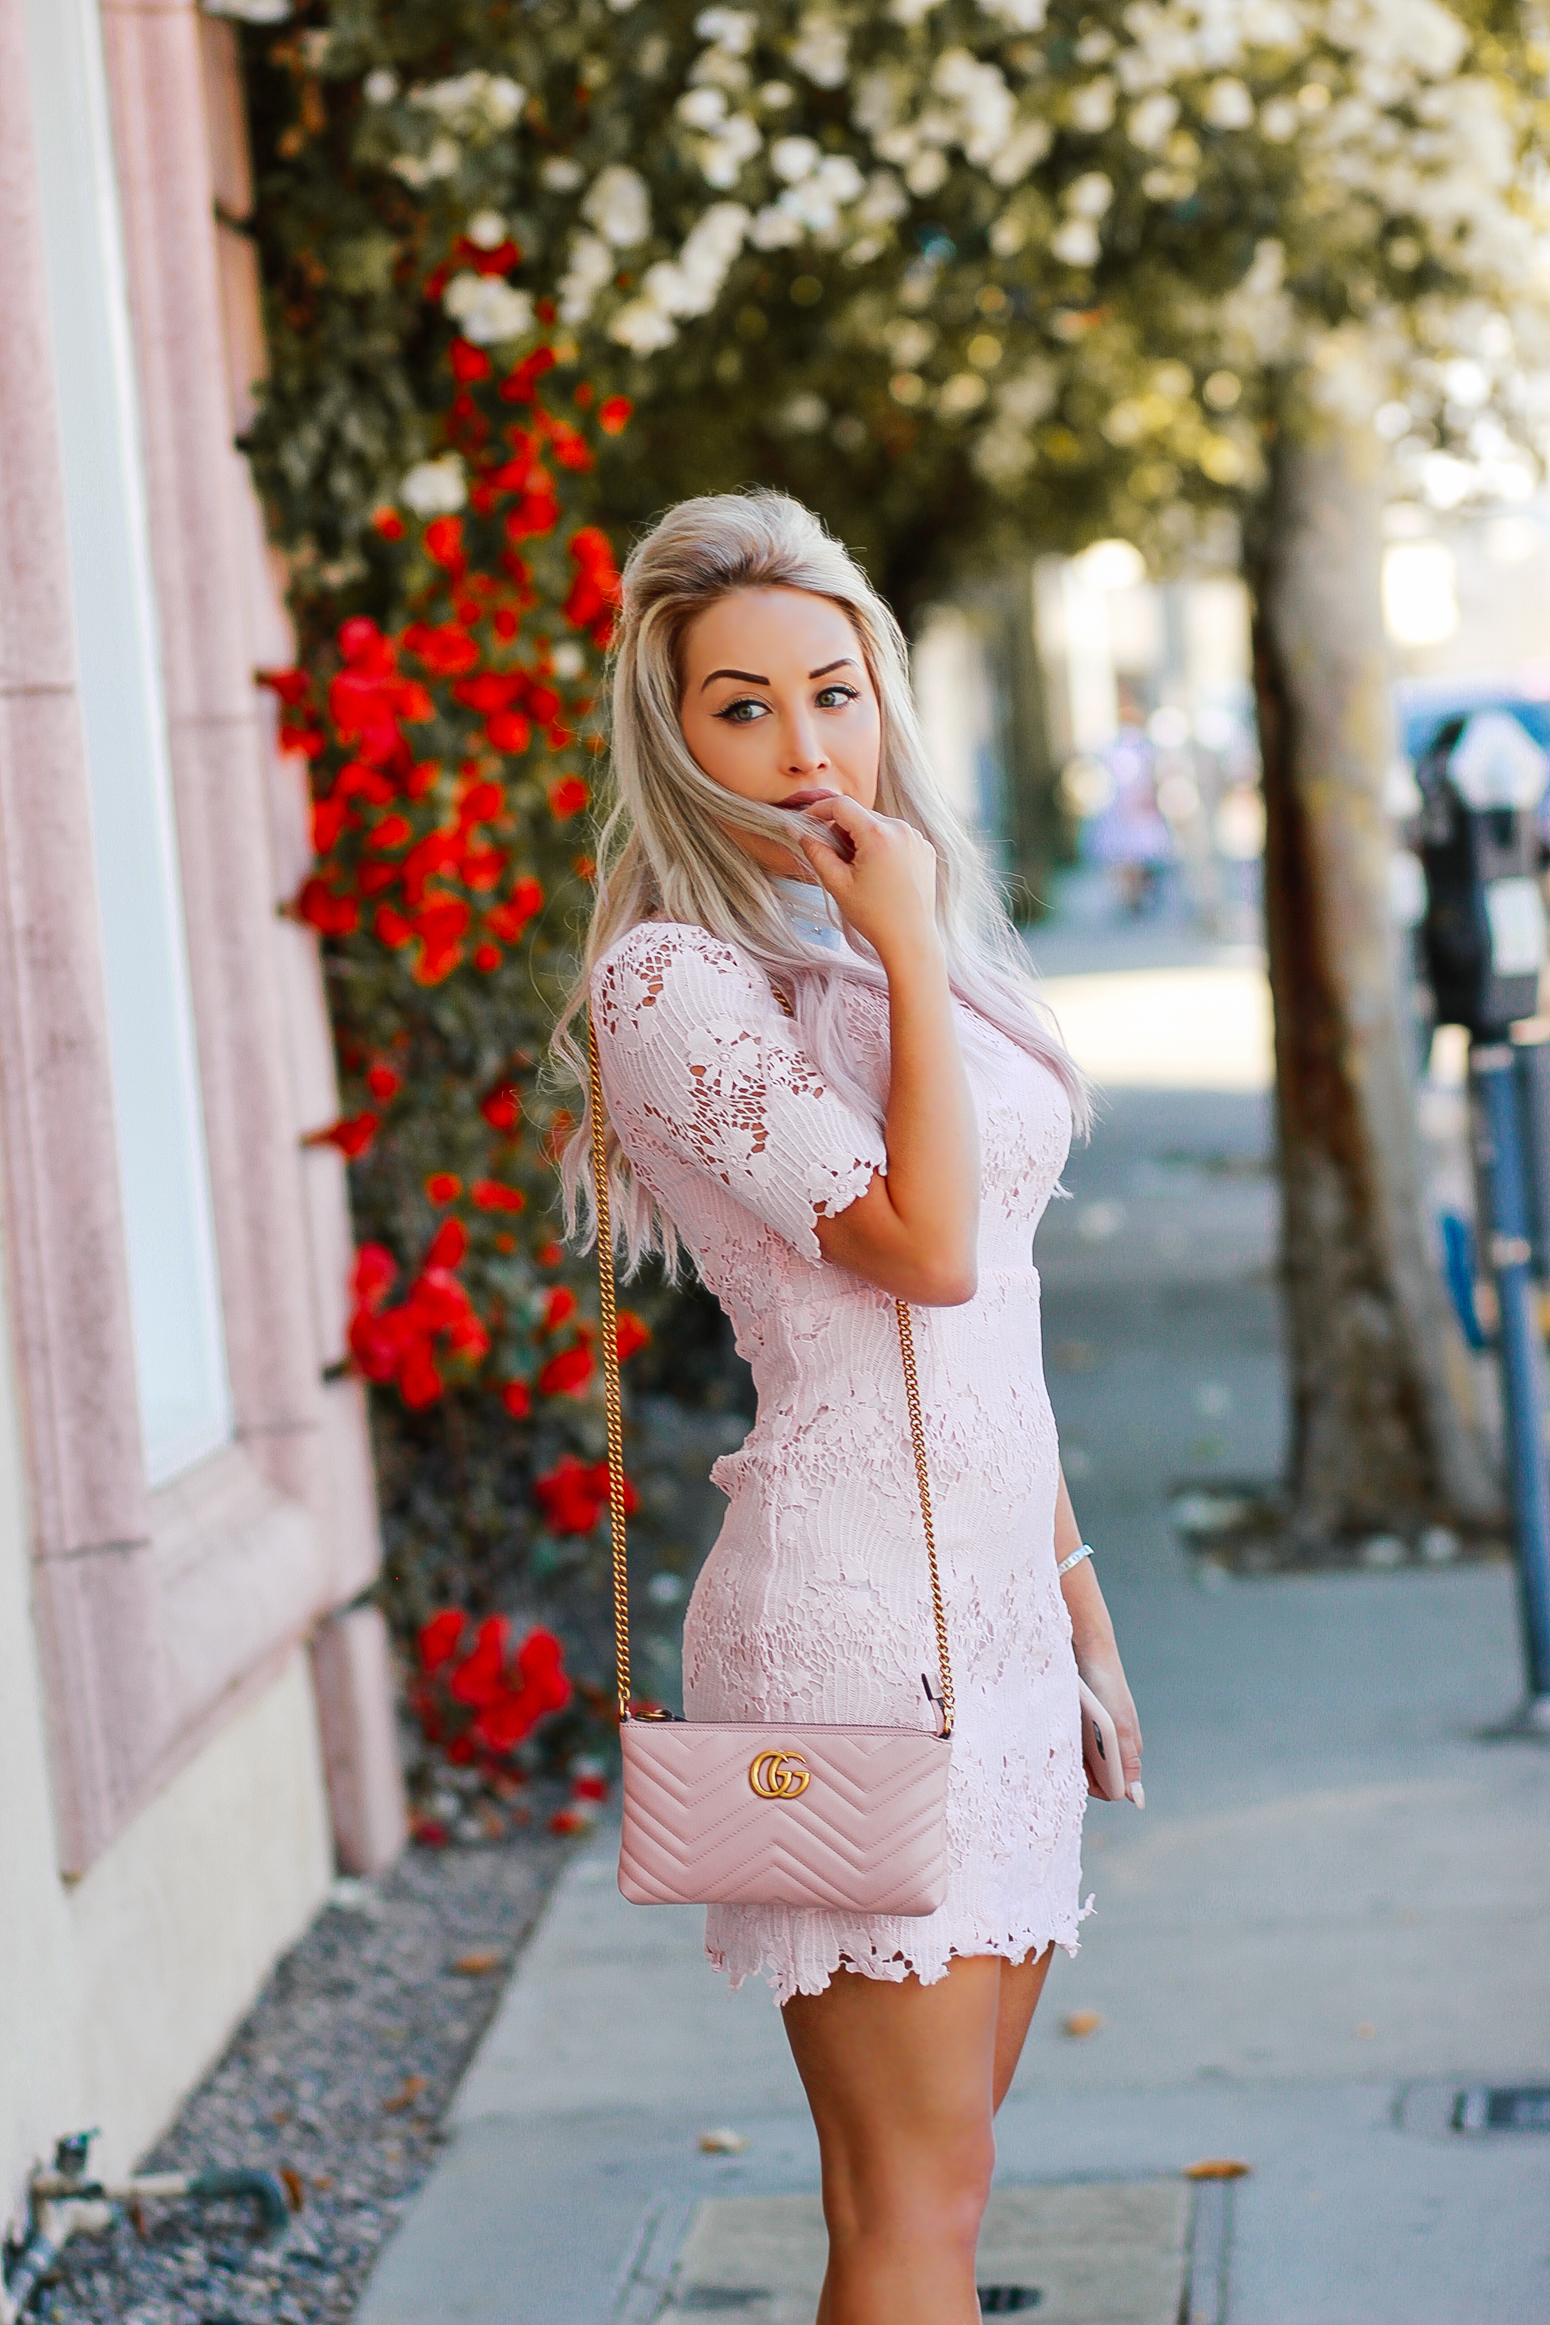 Blondie in the City | Gossip Girl/Blair Waldorf Vibes | Pink & Blue Pastel Lace Dress | Pink Christian Louboutin's